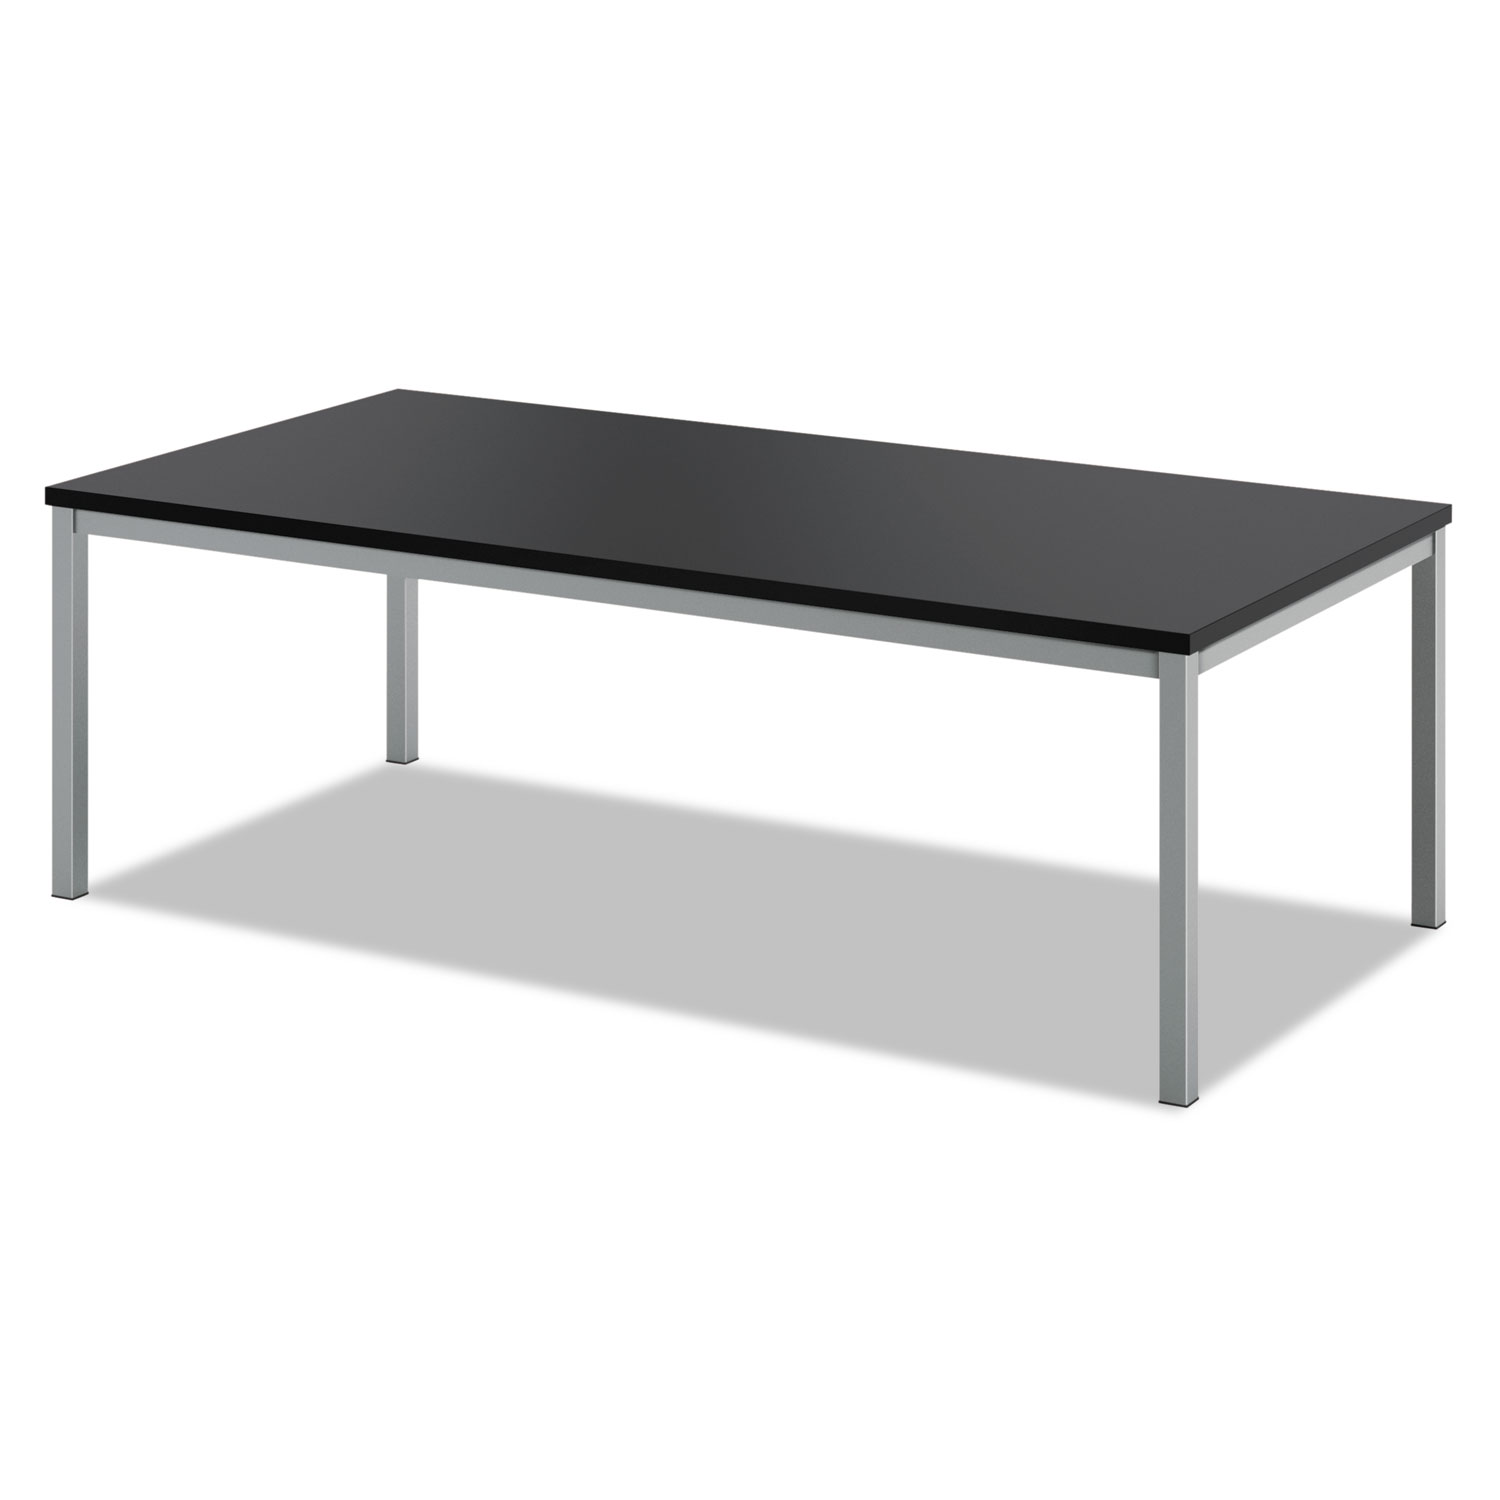  HON HML8852.P Occasional Coffee Table, 48w x 24d, Black (BSXHML8852P) 